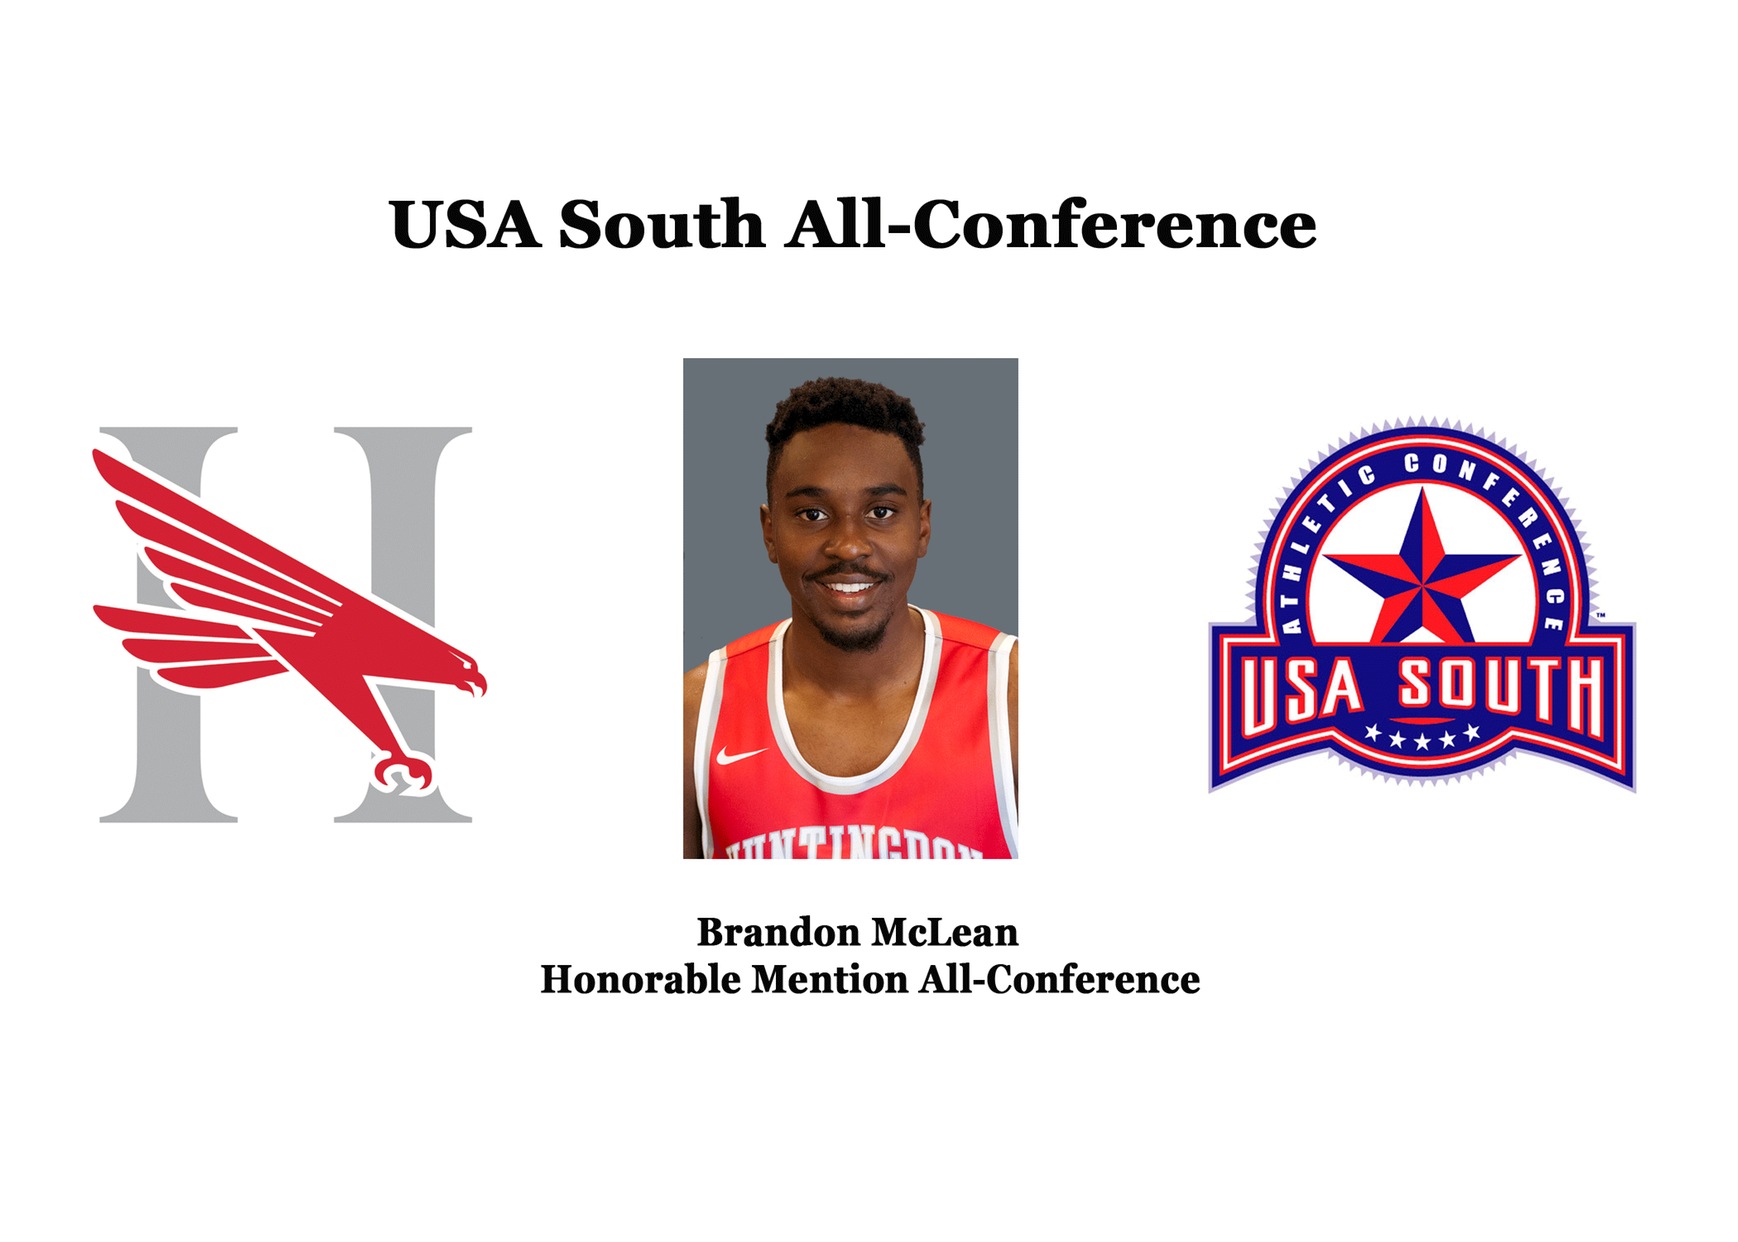 McLean named honorable mention All-Conference